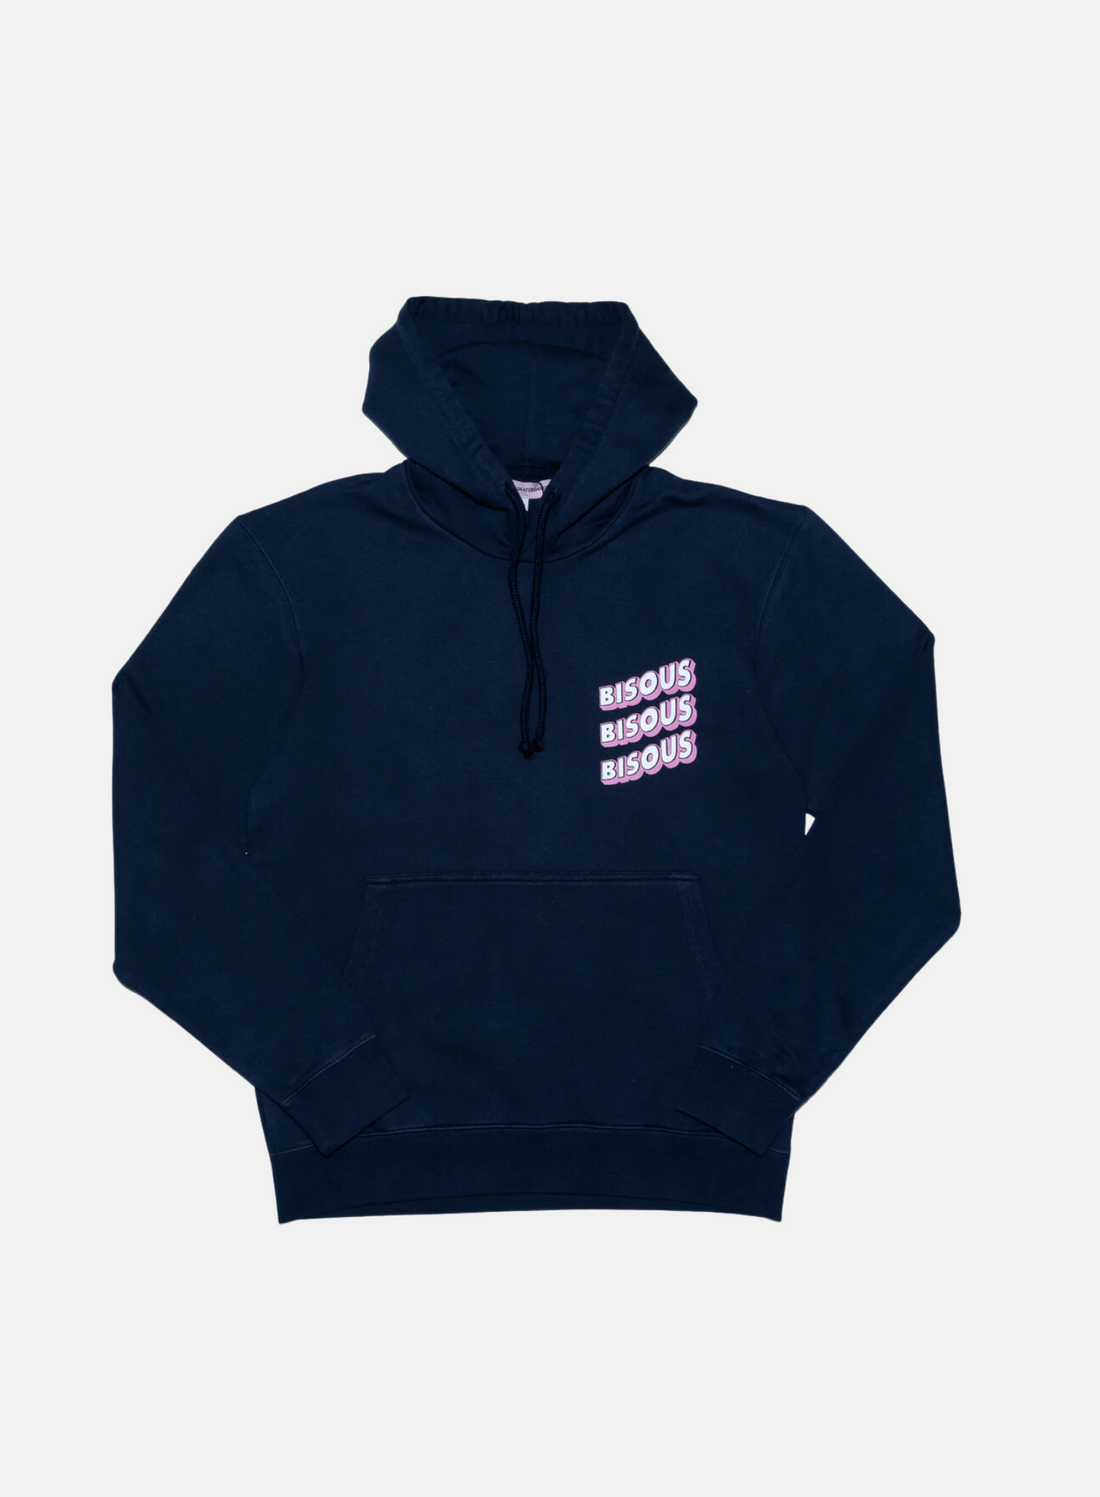 BISOUS SKATEBOARDS Sonics Hoodie Navy - Hympala Store 